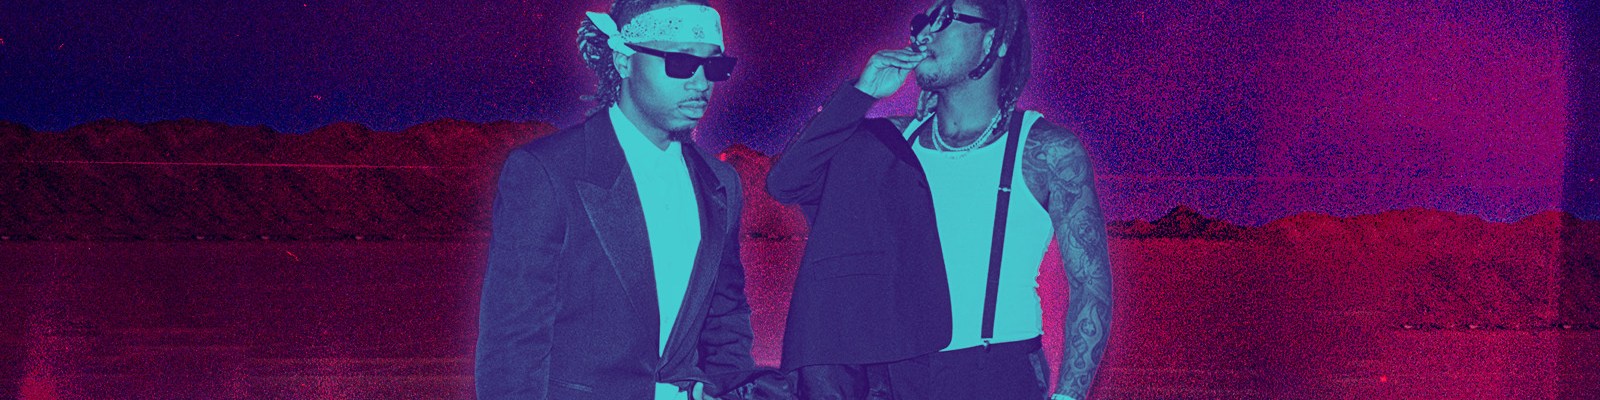 Future & Metro Boomin’s ‘We Don’t Trust You’ Is Too Good To Get Overshadowed By Petty Rap Beef